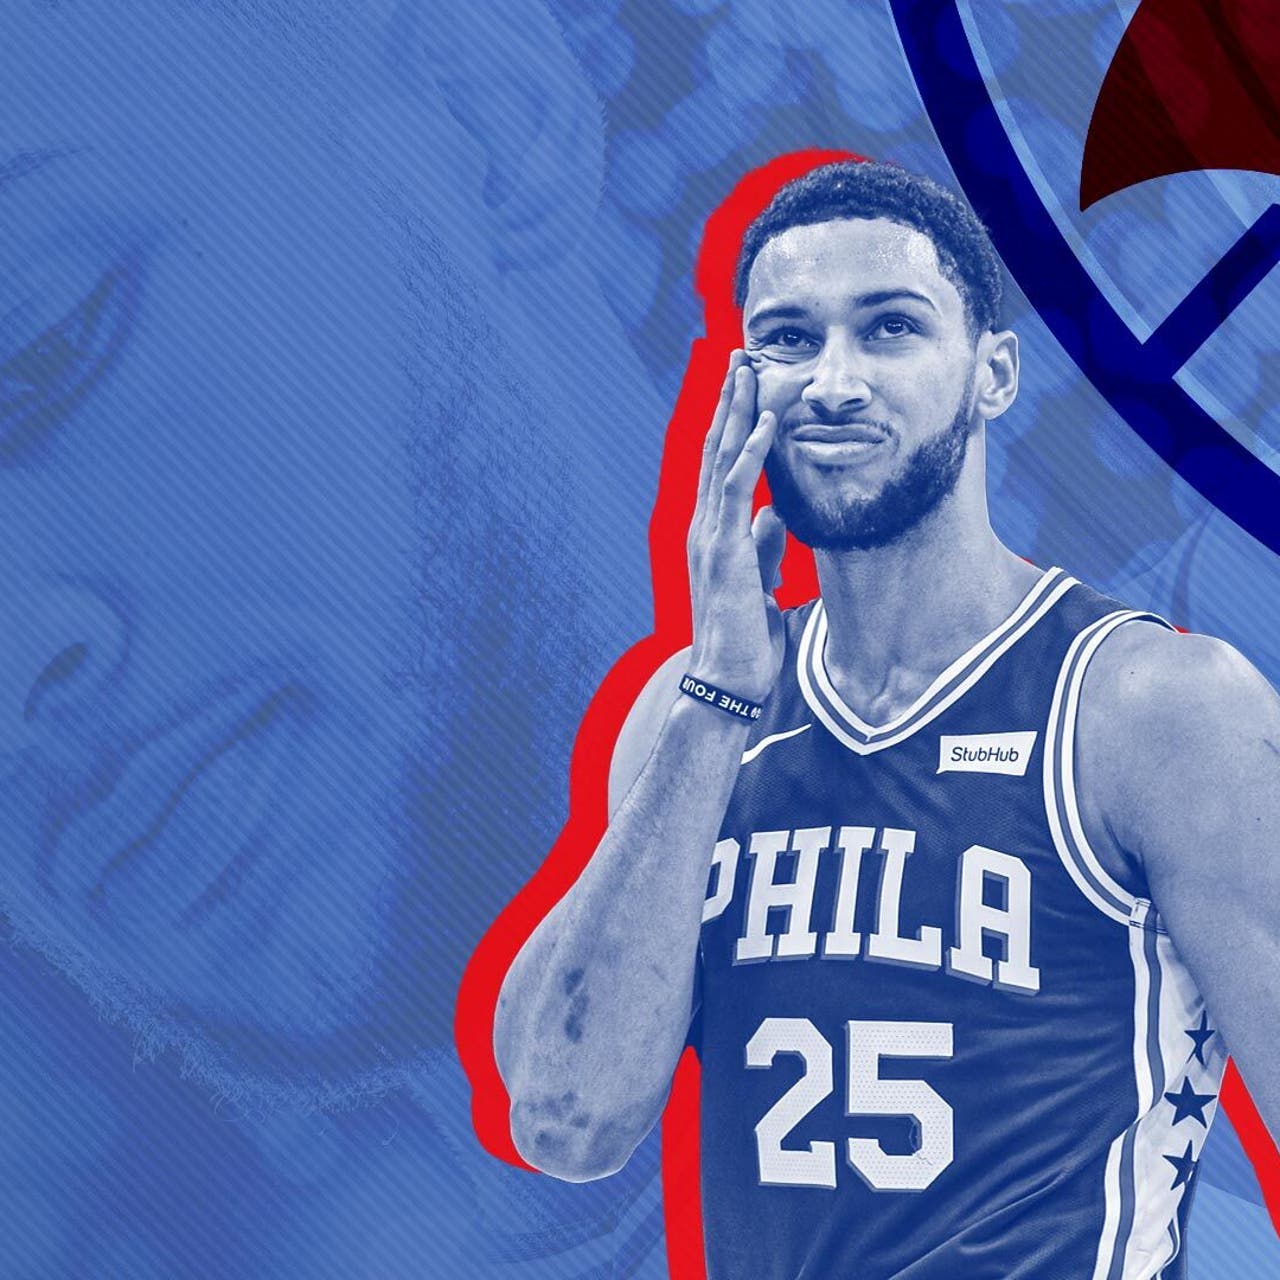 Demand for Sixers tickets ranks third in NBA according to StubHub